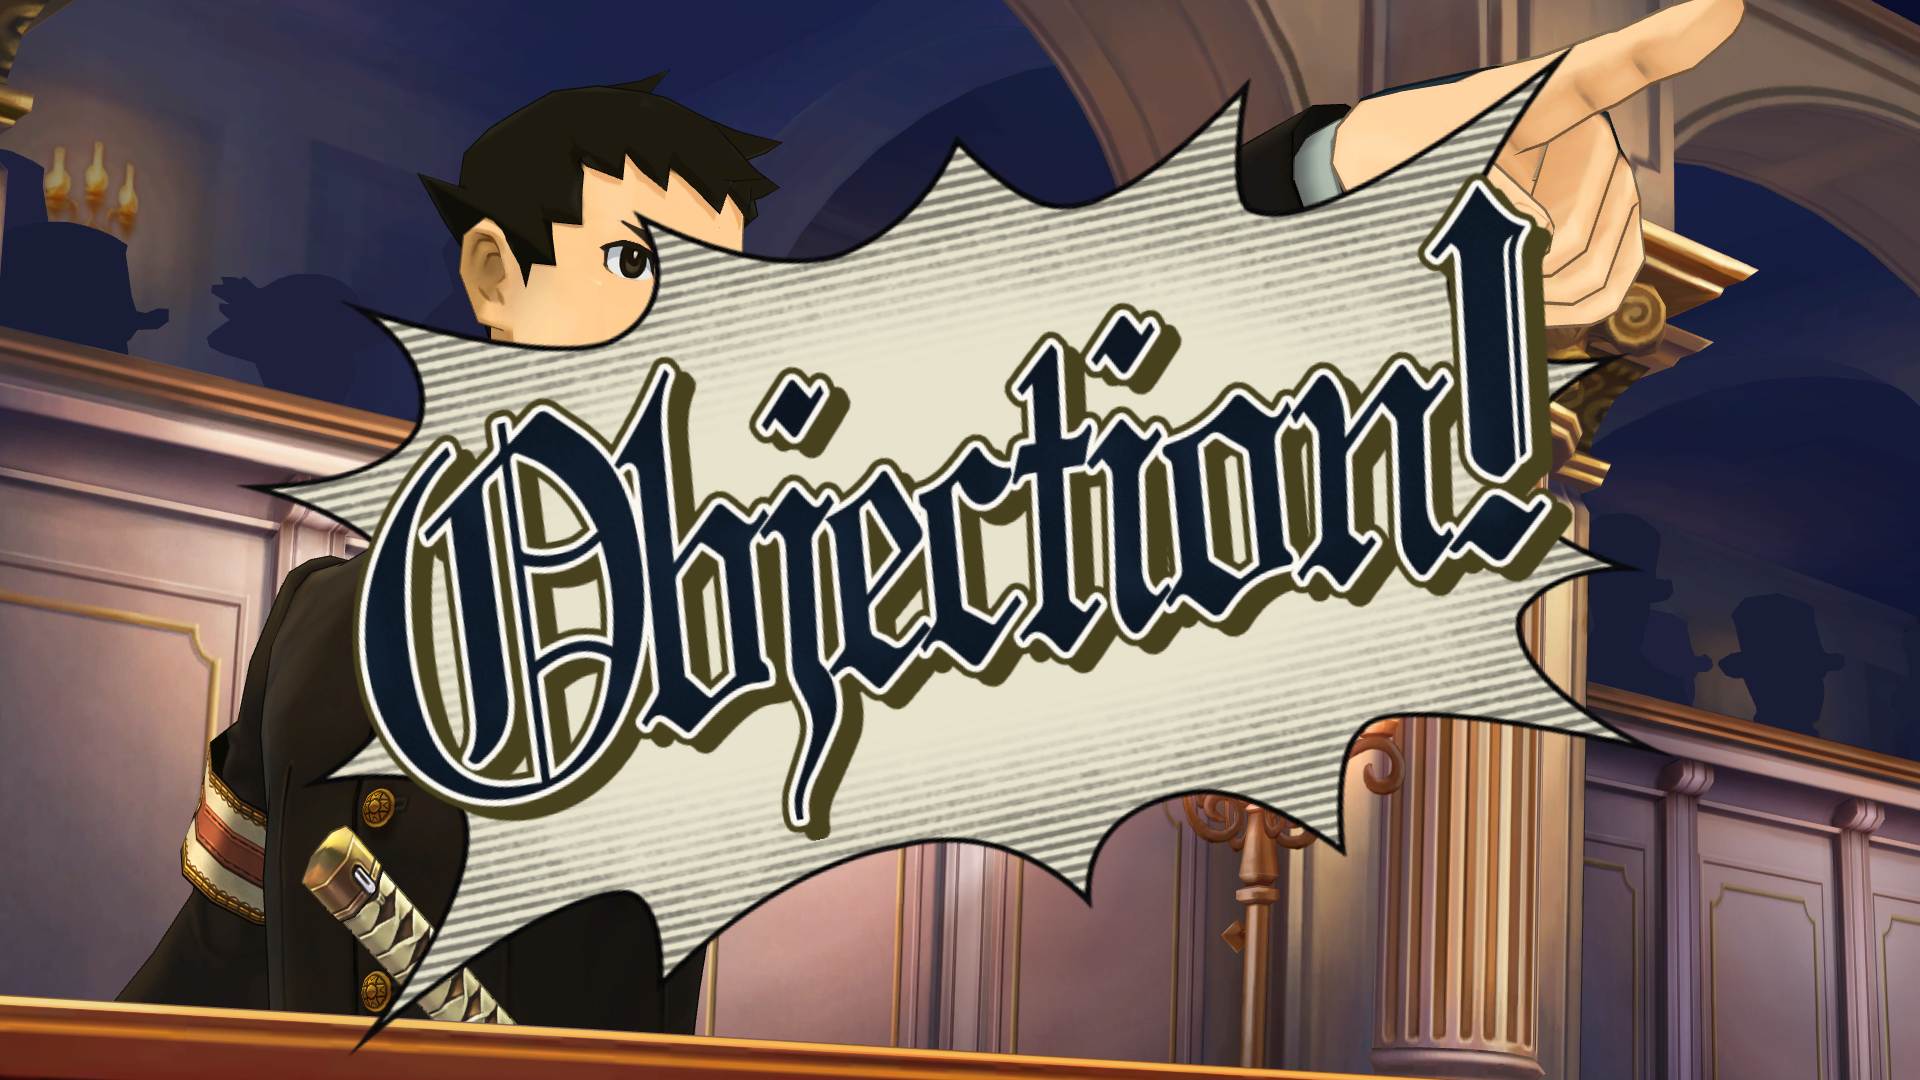 The classic "Objection!" in The Great Ace Attorney Chronicles